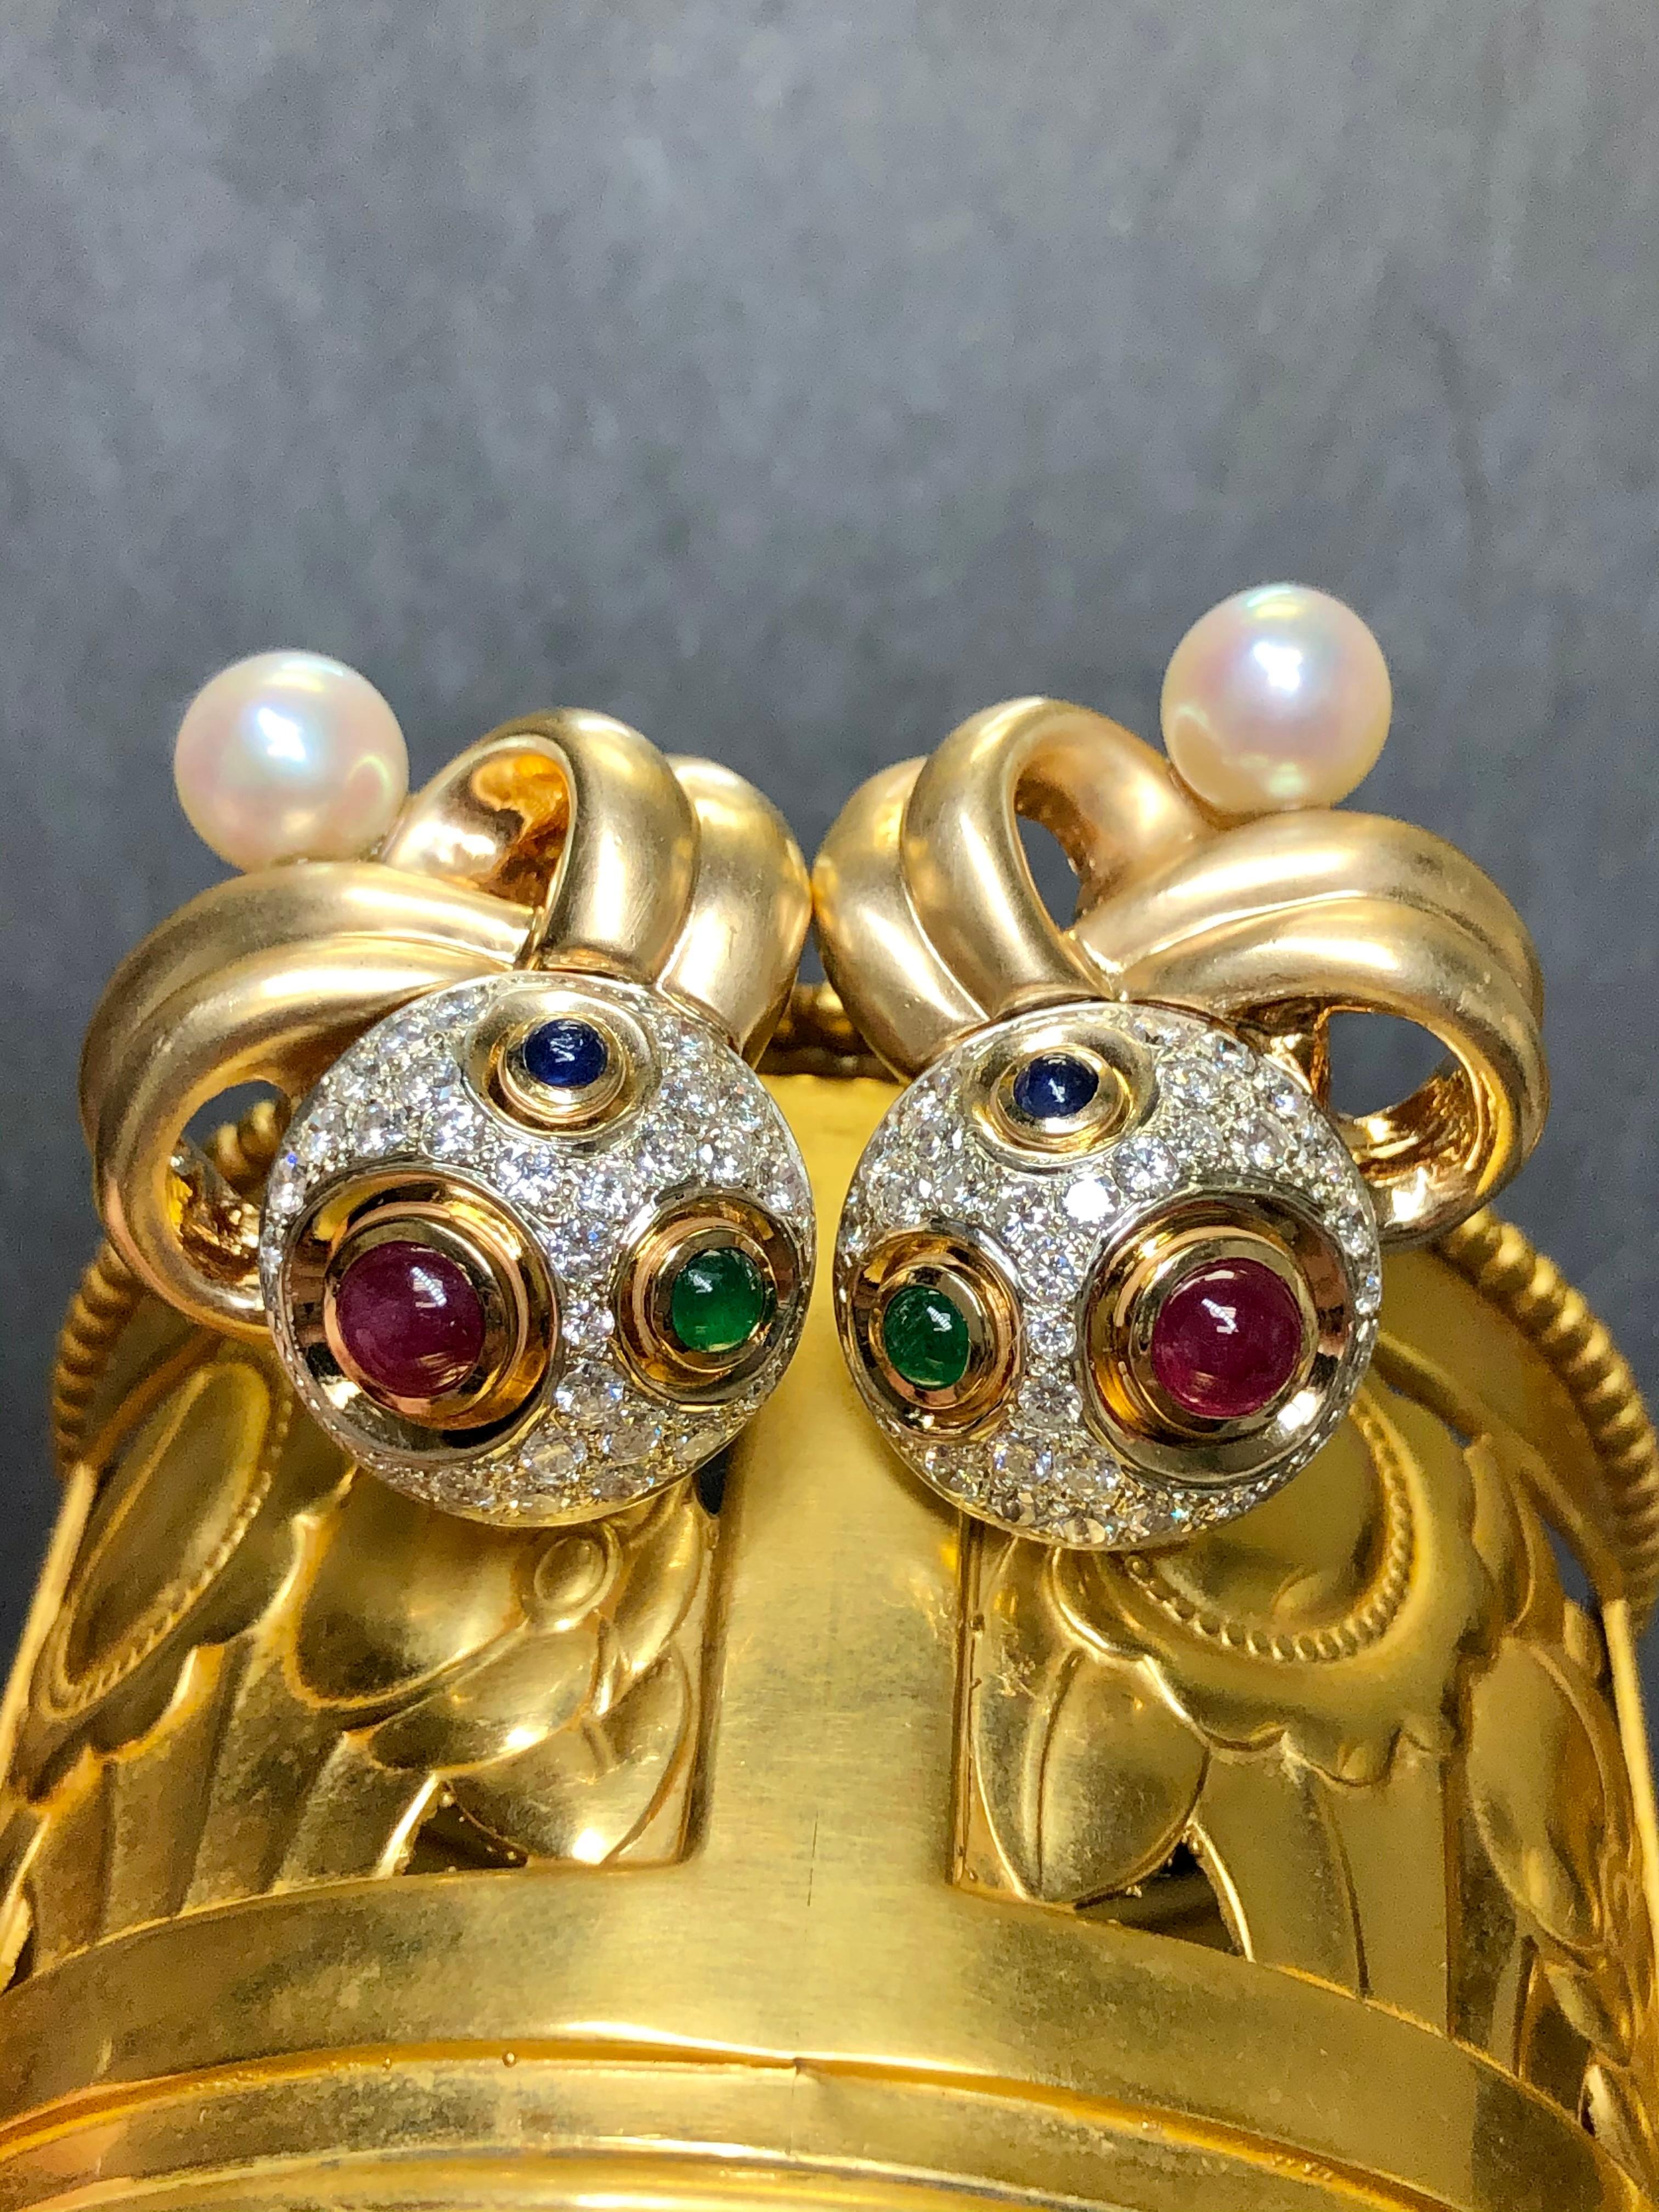 
A beautiful and unique pair of earrings hand crafted in 14K satin finished and high polished yellow gold set with approximately 2cttw in G-I color Vs1-2 clarity round diamonds as well as approximately 1cttw cabochon sapphires, 1.50cttw in cabochon